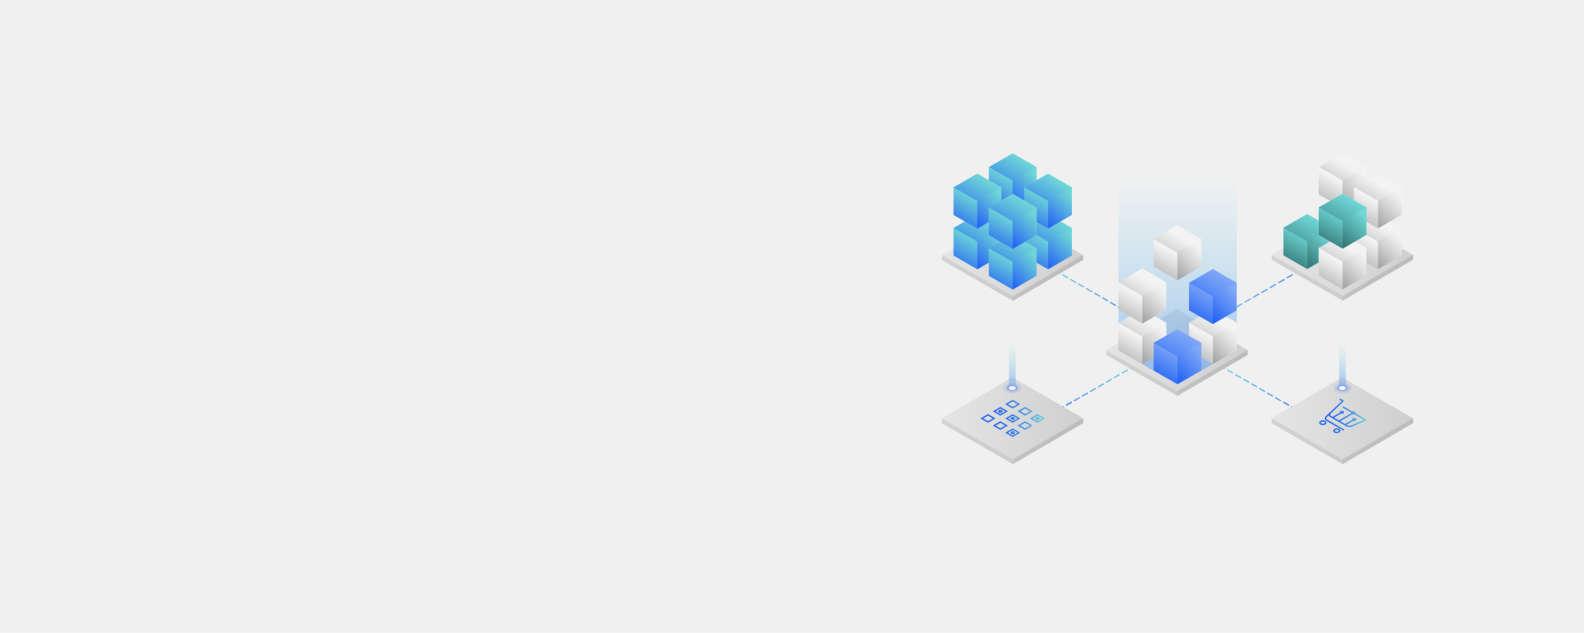 Isometric illustration for Websphere 